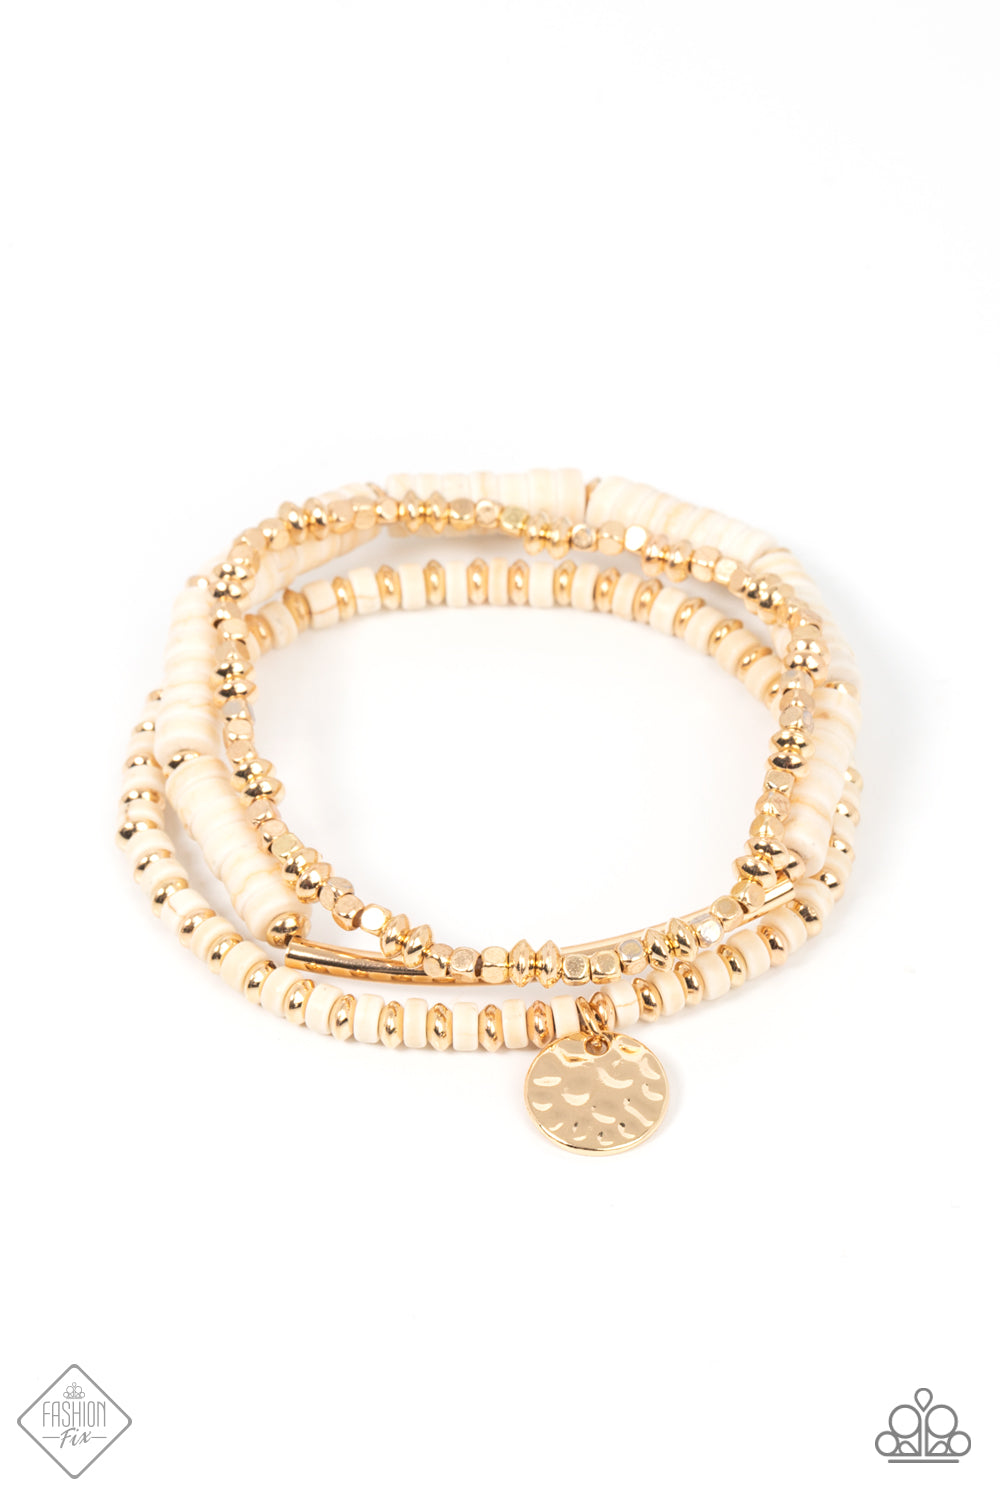 Terraform Trendsetter - Earthy White and Gold Bracelet - Paparazzi Accessories